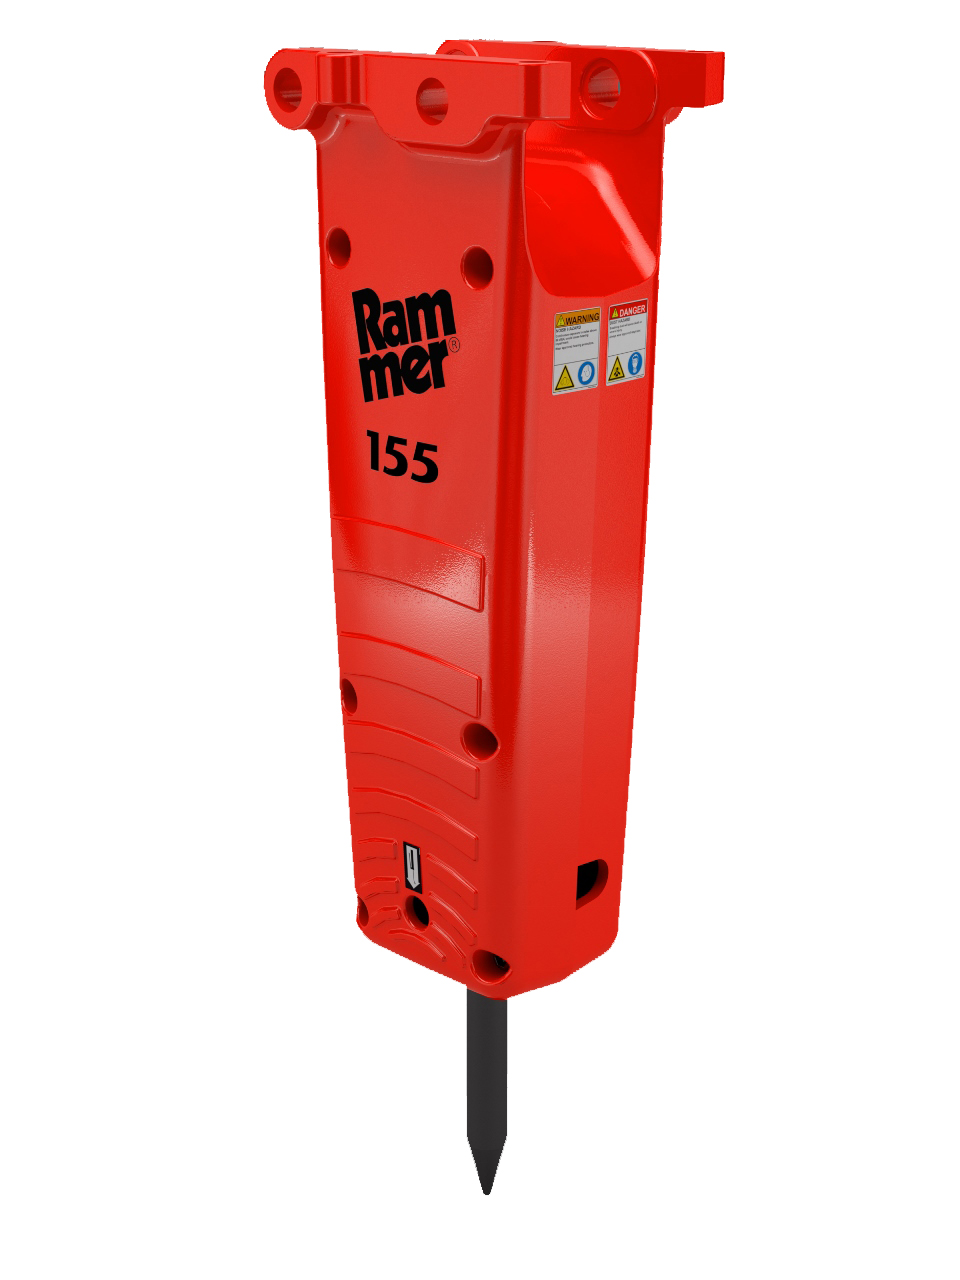 Rammer’s new compact breakers 